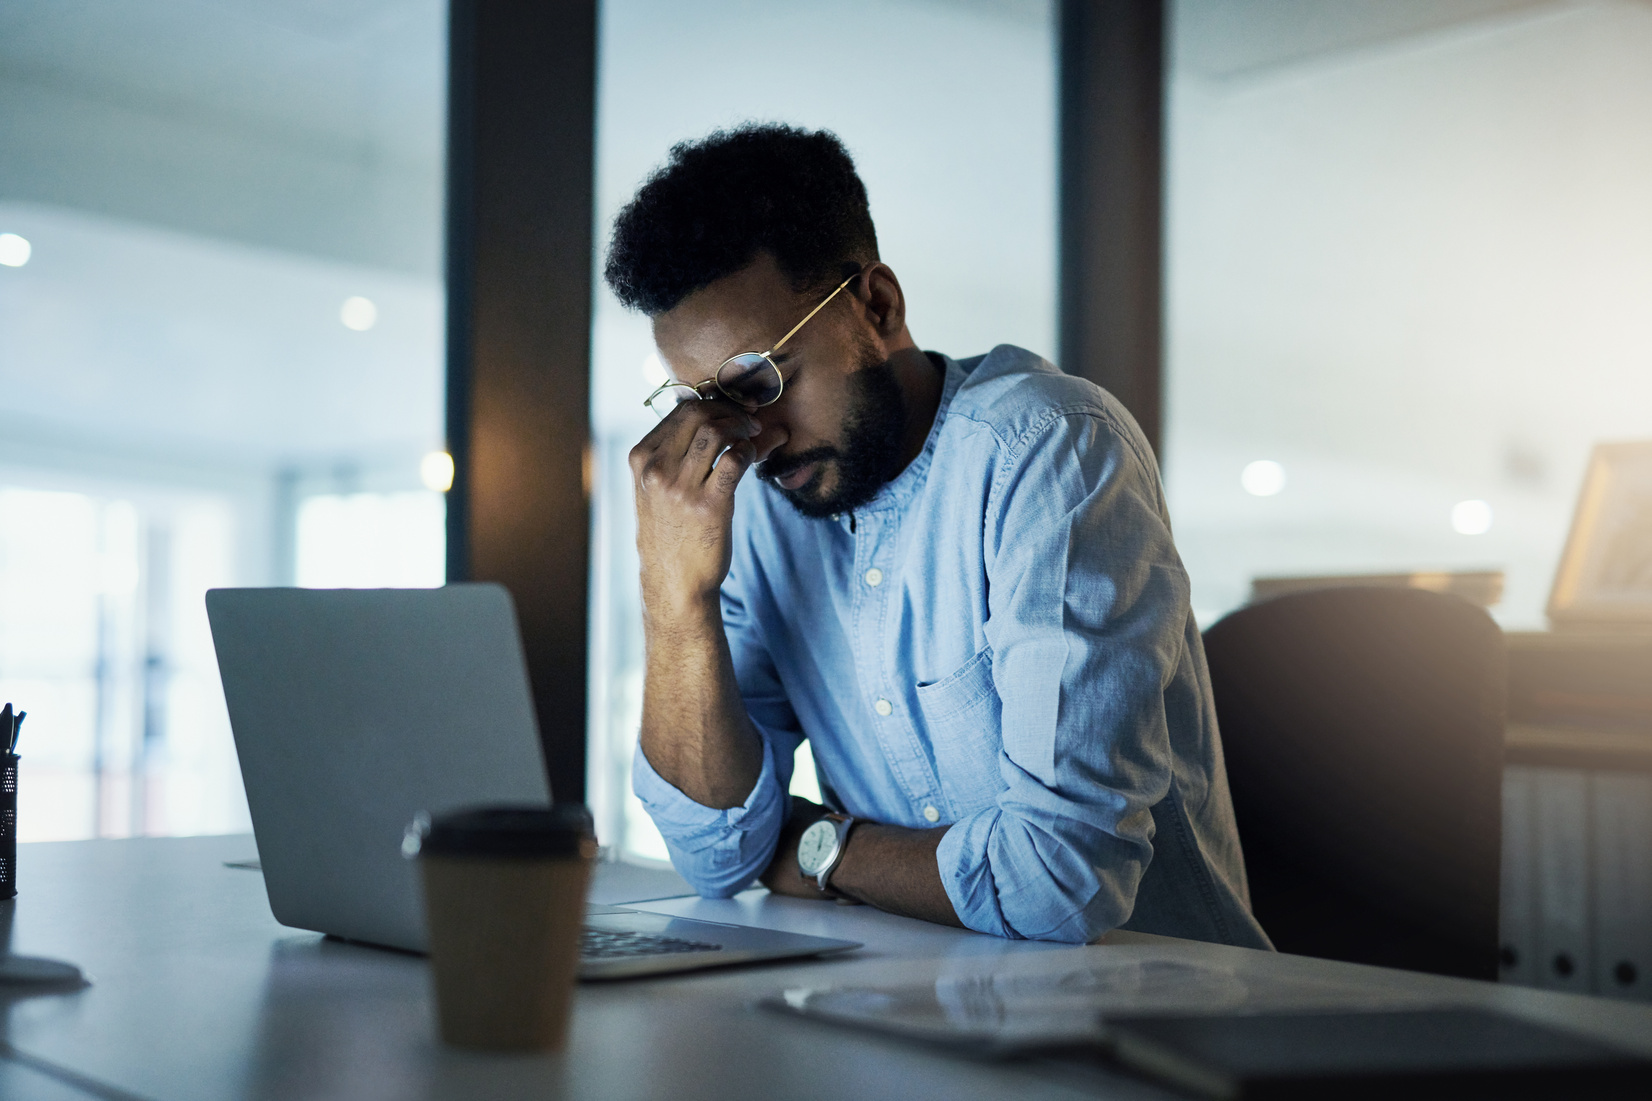 Workplace stress can bring serious consequences